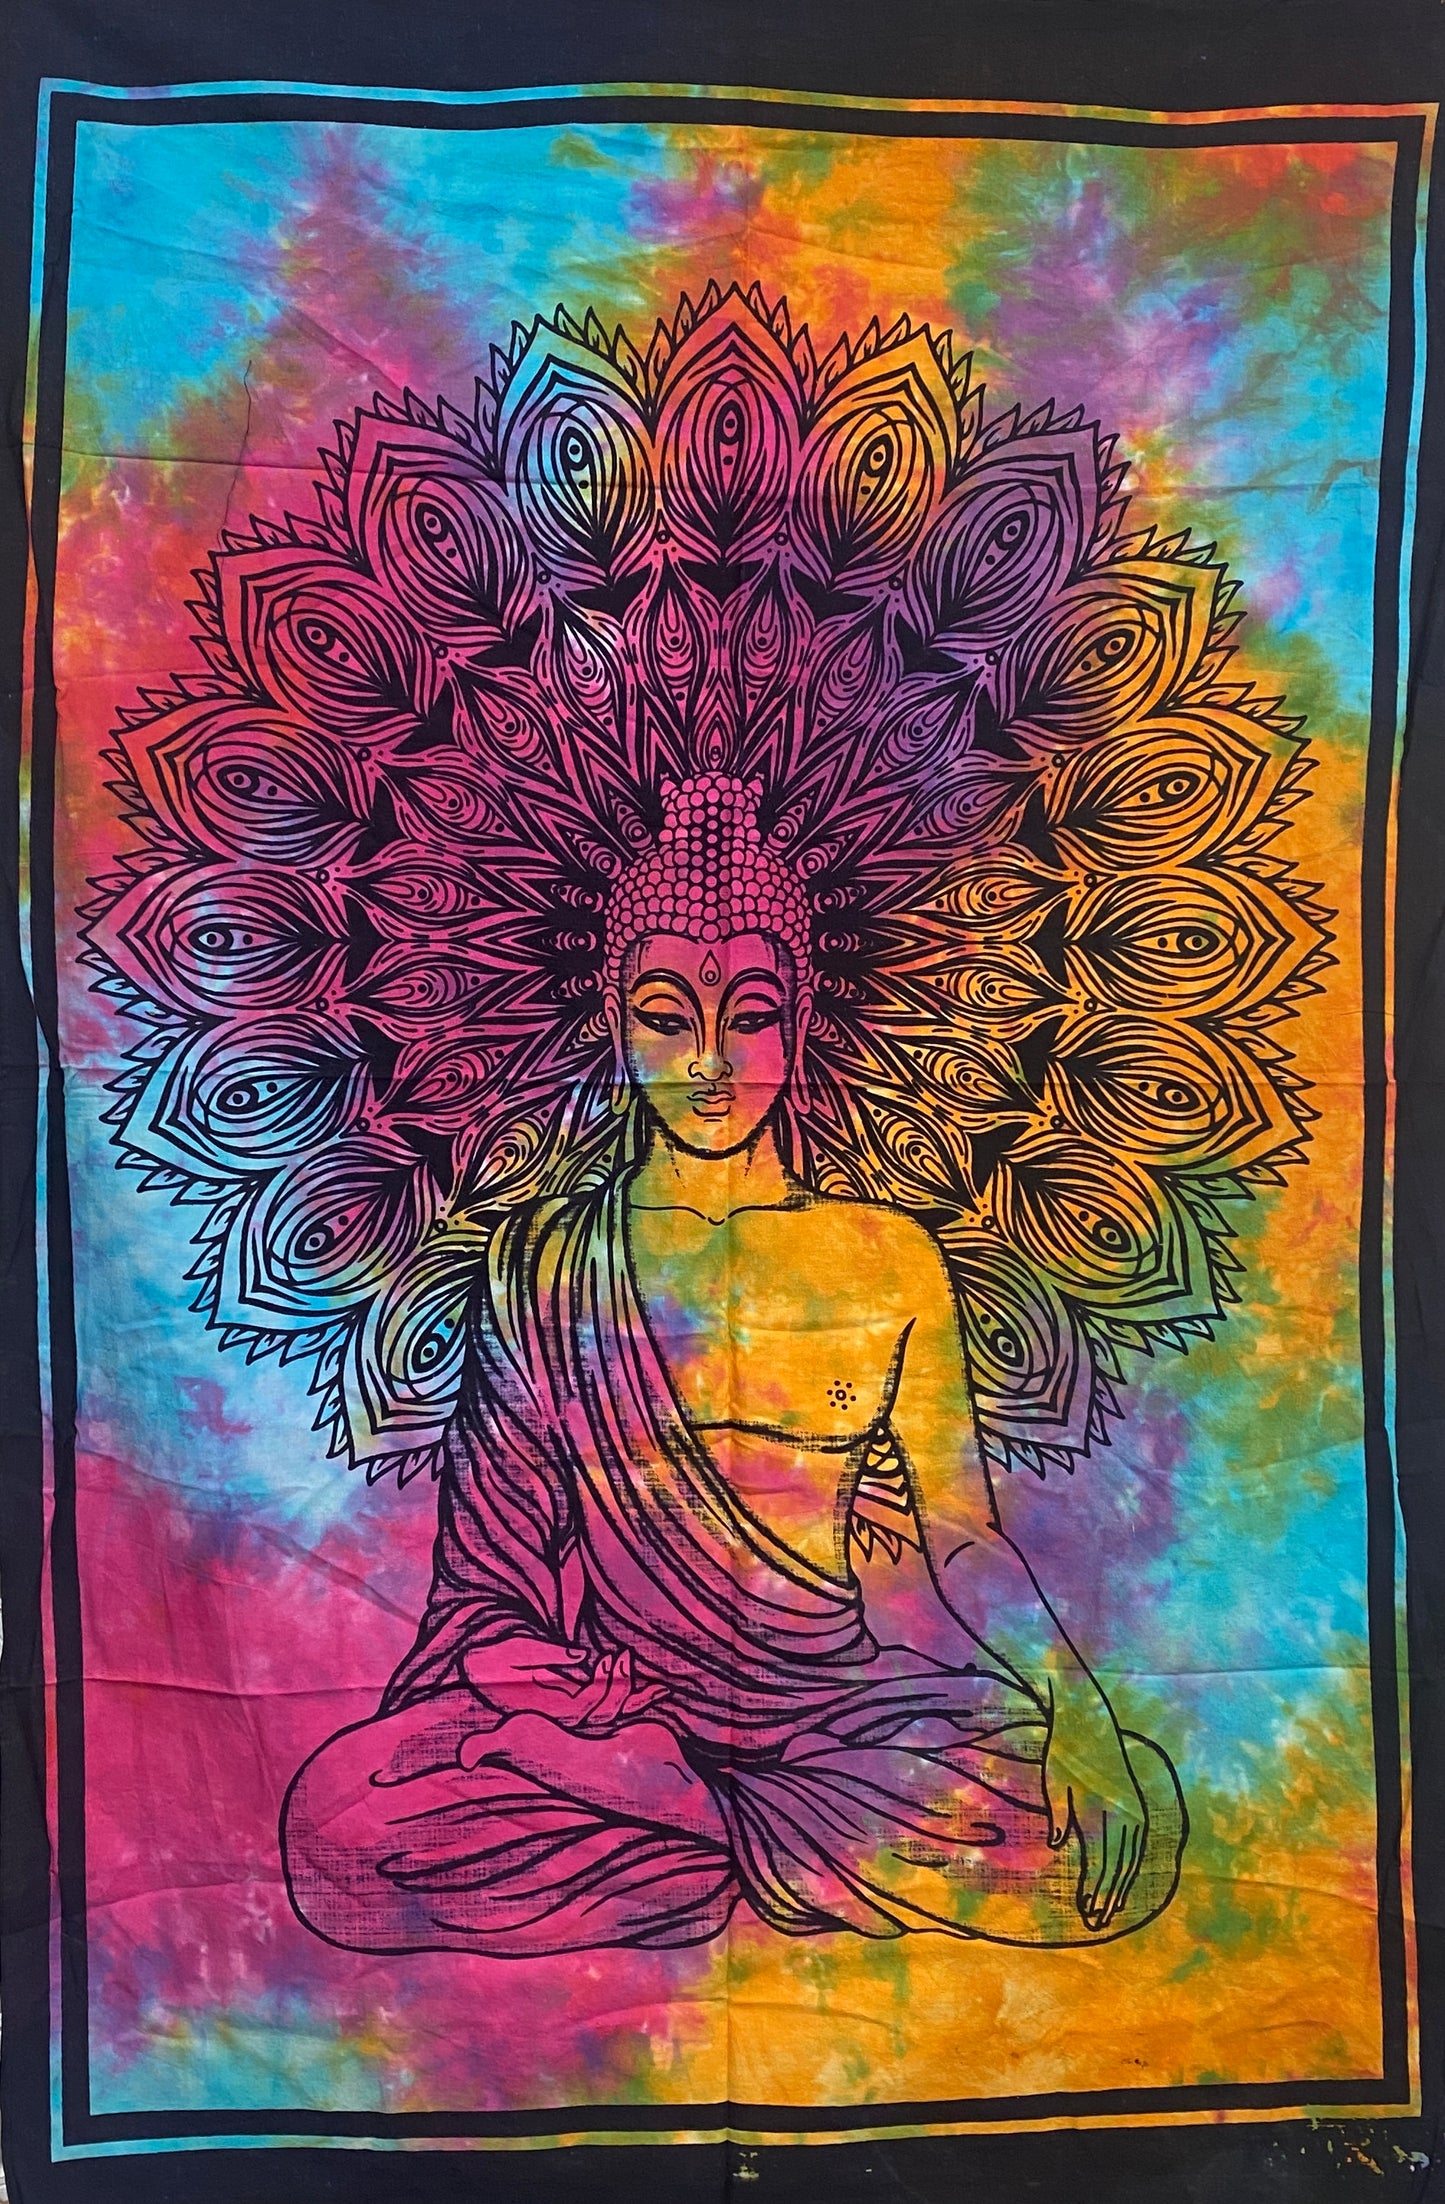 Hand printed Fabric Posters Mini Buddha Tapestries Wall Hangings - Available in 2 Colors